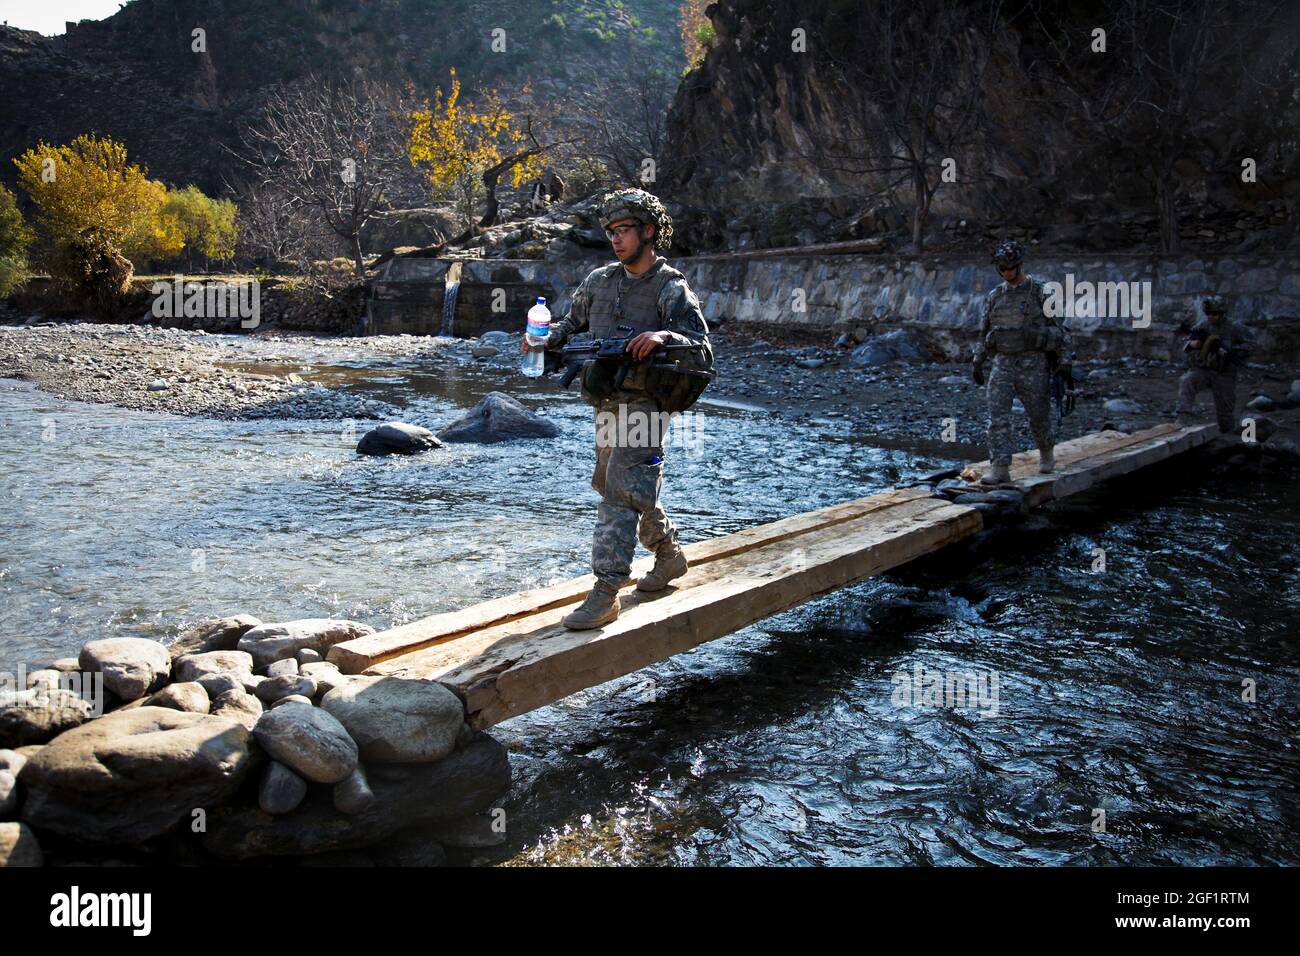 U.S. Army Pfc. Emeterio Jimenez and fellow Soldiers assigned to Combat Company, 1st Battalion, 32nd Infantry Regiment, 3rd Brigade Combat Team, 10th Mountain Division, cross a river as they approach the village of Lachey in the Shigal district of Kunar province, Afghanistan on Dec. 7. Stock Photo